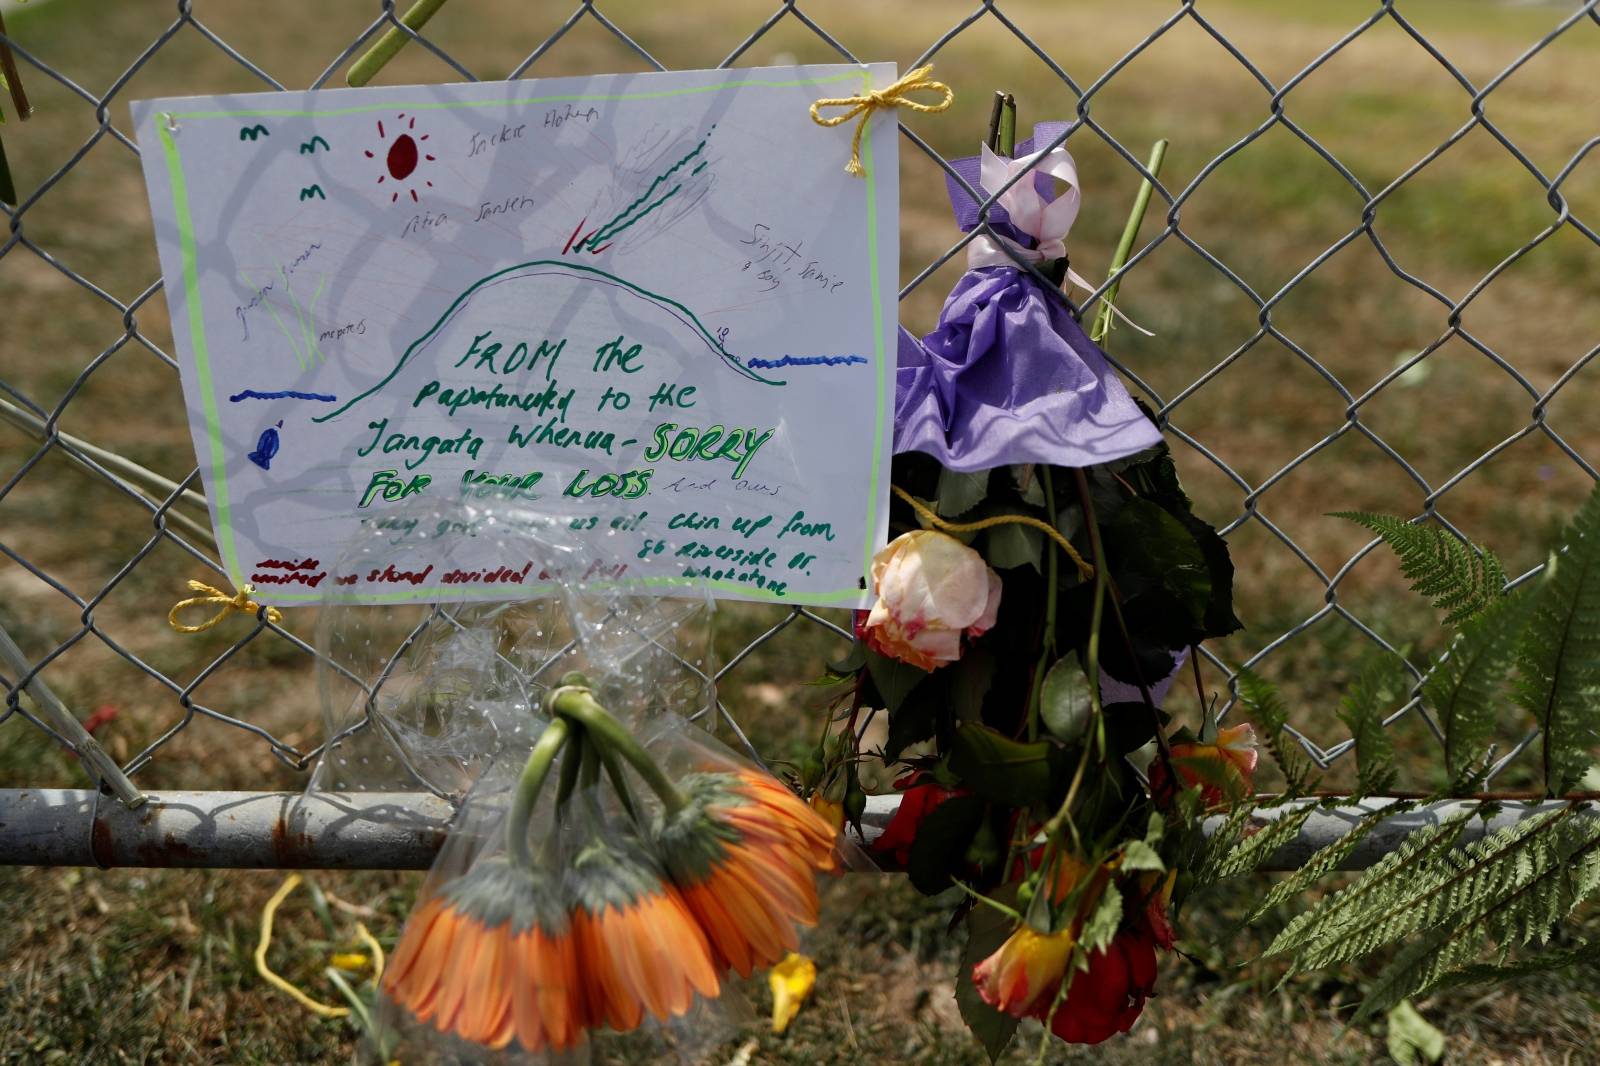 A note of condolence is seen at a memorial at the harbour in Whakatane, following the White Island volcano eruption in New Zealand